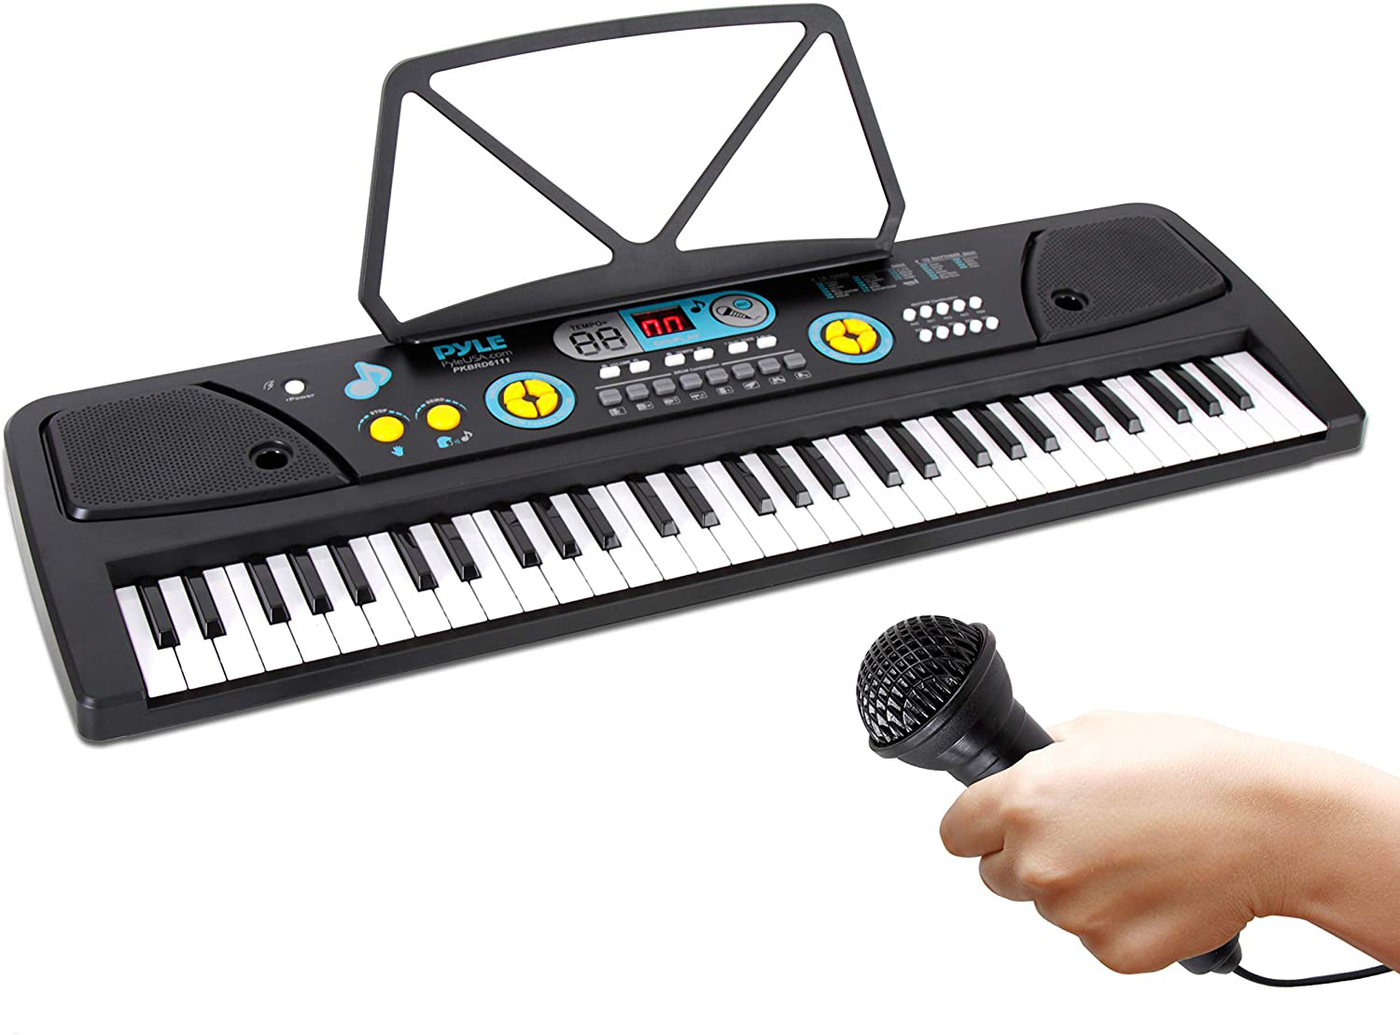 Digital Piano Keyboard - Portable Key Learning Keyboard for Beginners w/ Drum Pad, Recording, Microphone, Music Sheet Stand & Built-in Speaker